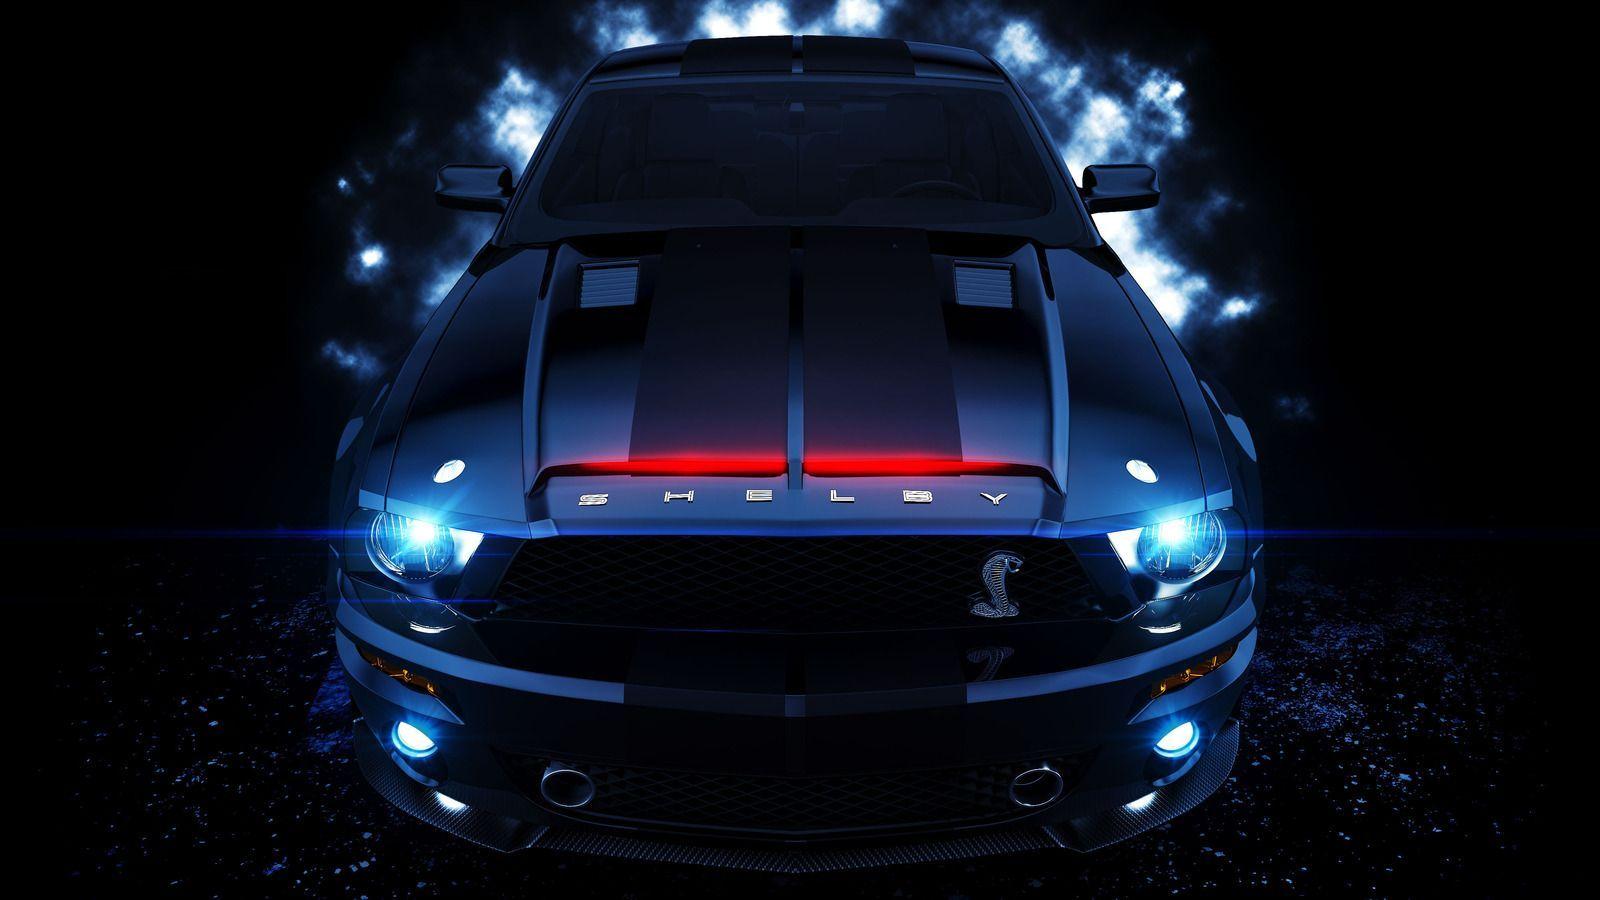 Blue Ford Mustang Shelby GT500 Car Picture HD Wallpaper. Ford